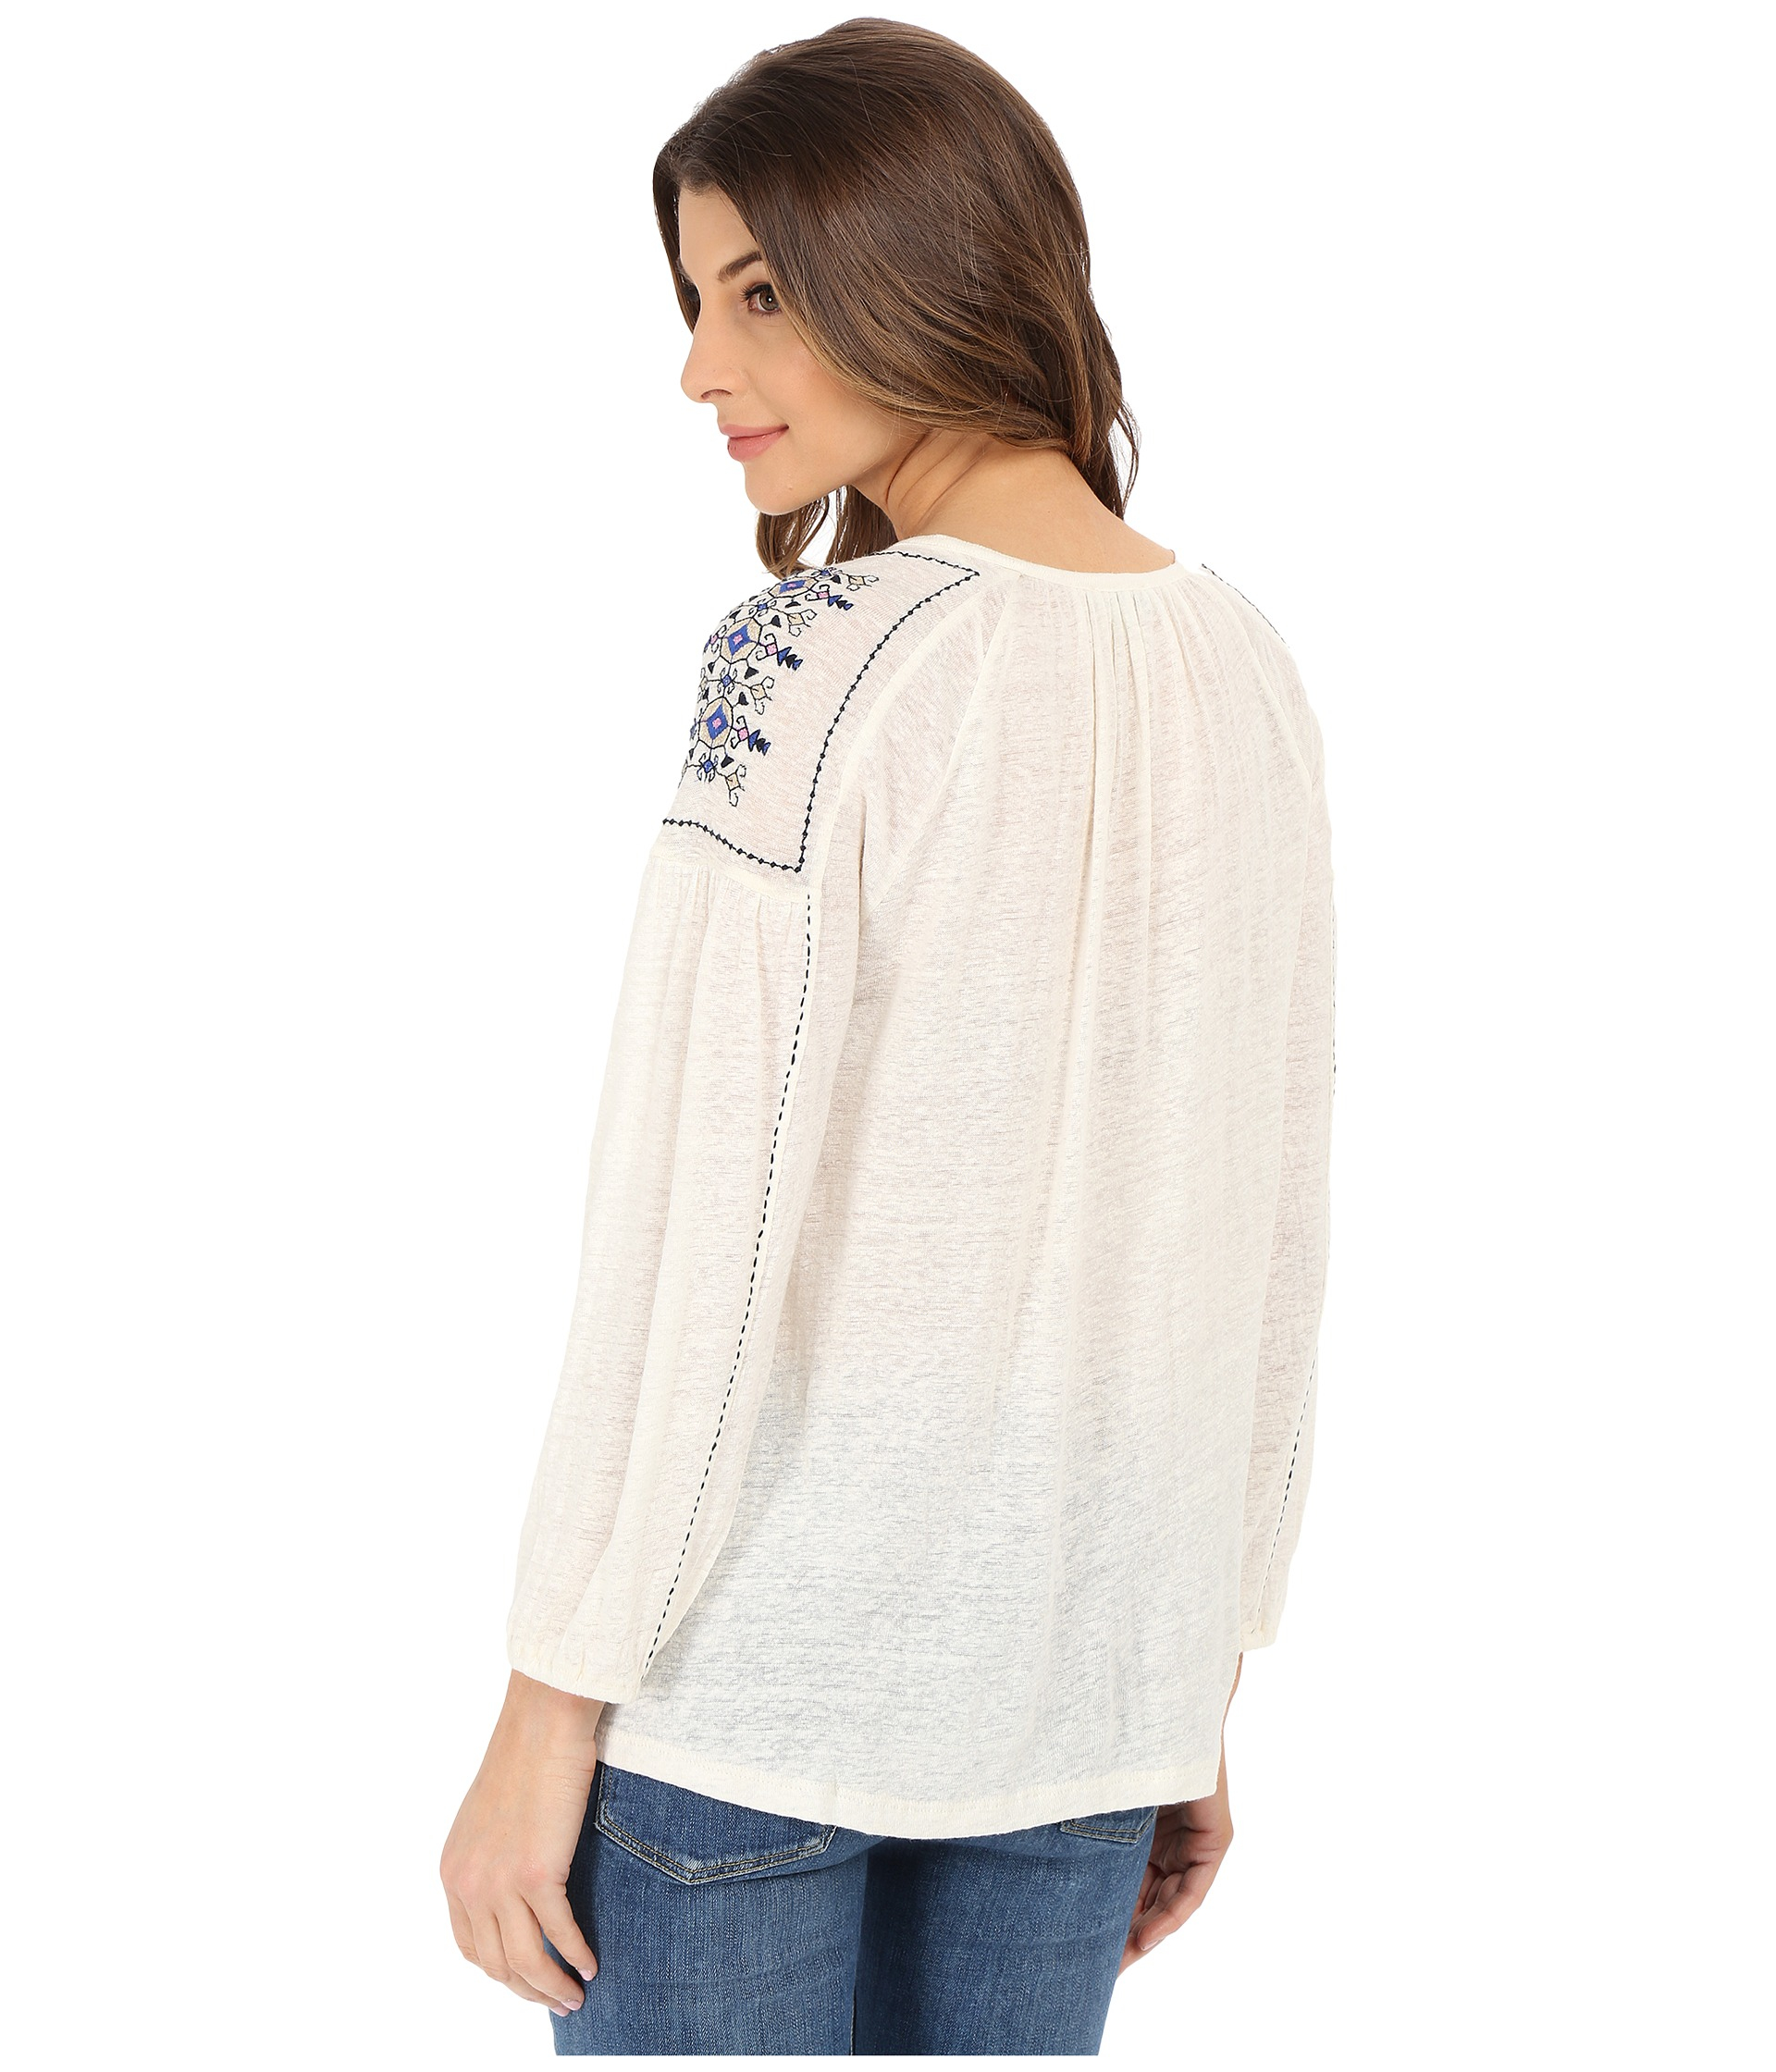 Lucky Brand Embroidered Peasant Top in White - Lyst